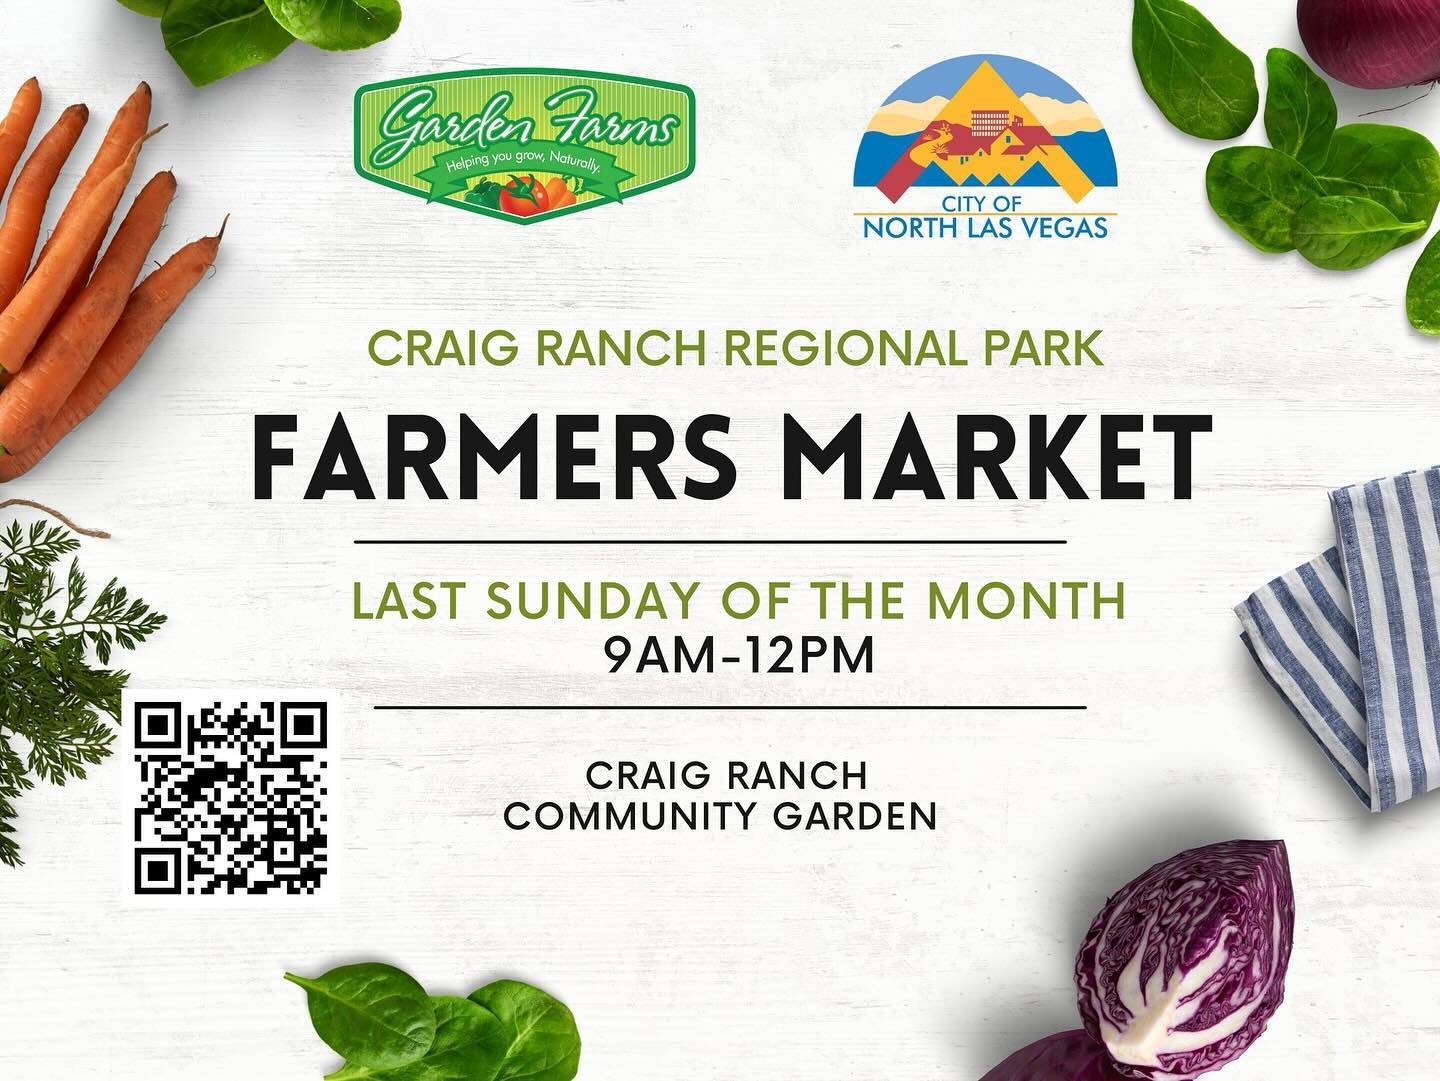 Join us at Garden Farms&rsquo; Community Garden inside of Craig Ranch Regional Park this Sunday April 28th for a free mini farmers market!

Discover local produce, handmade crafts, and artisanal delights at our monthly mini farmers market!

🥬 Fresh,